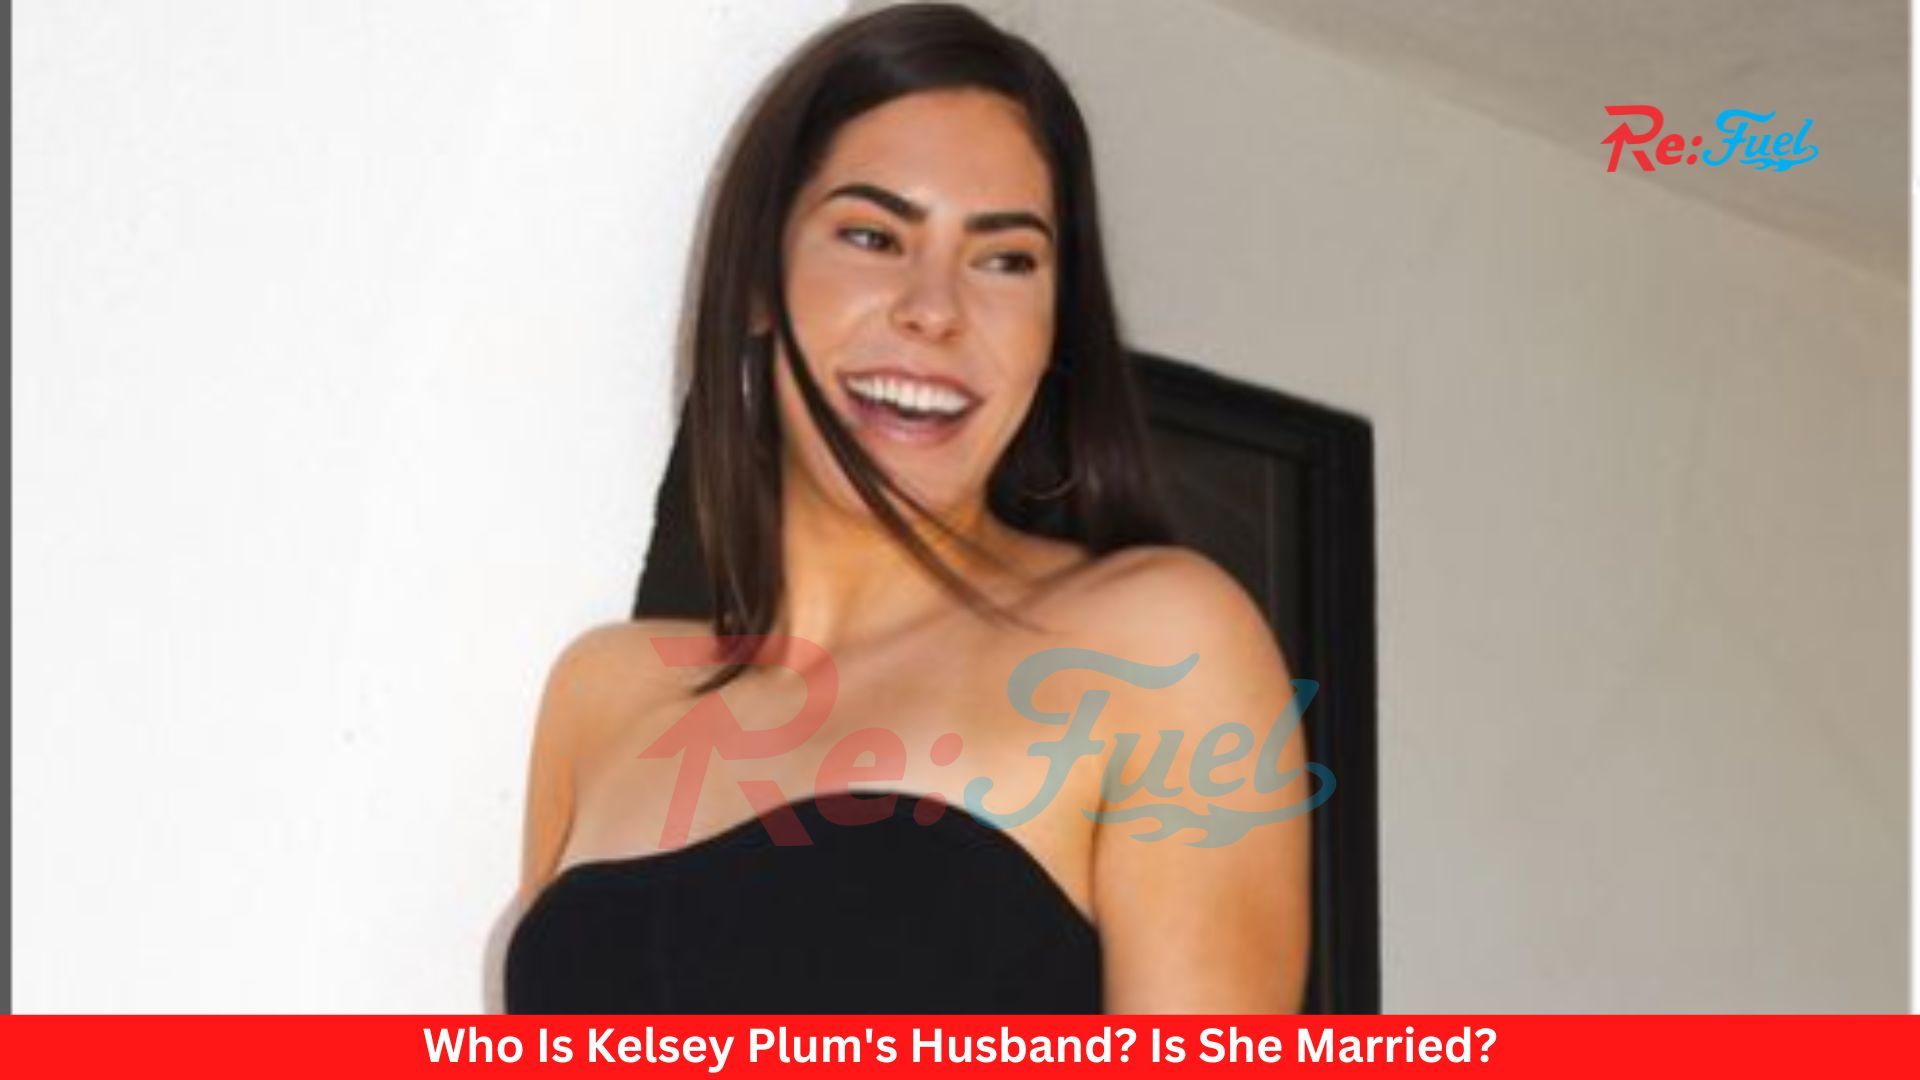 Who Is Kelsey Plum's Husband? Is She Married?